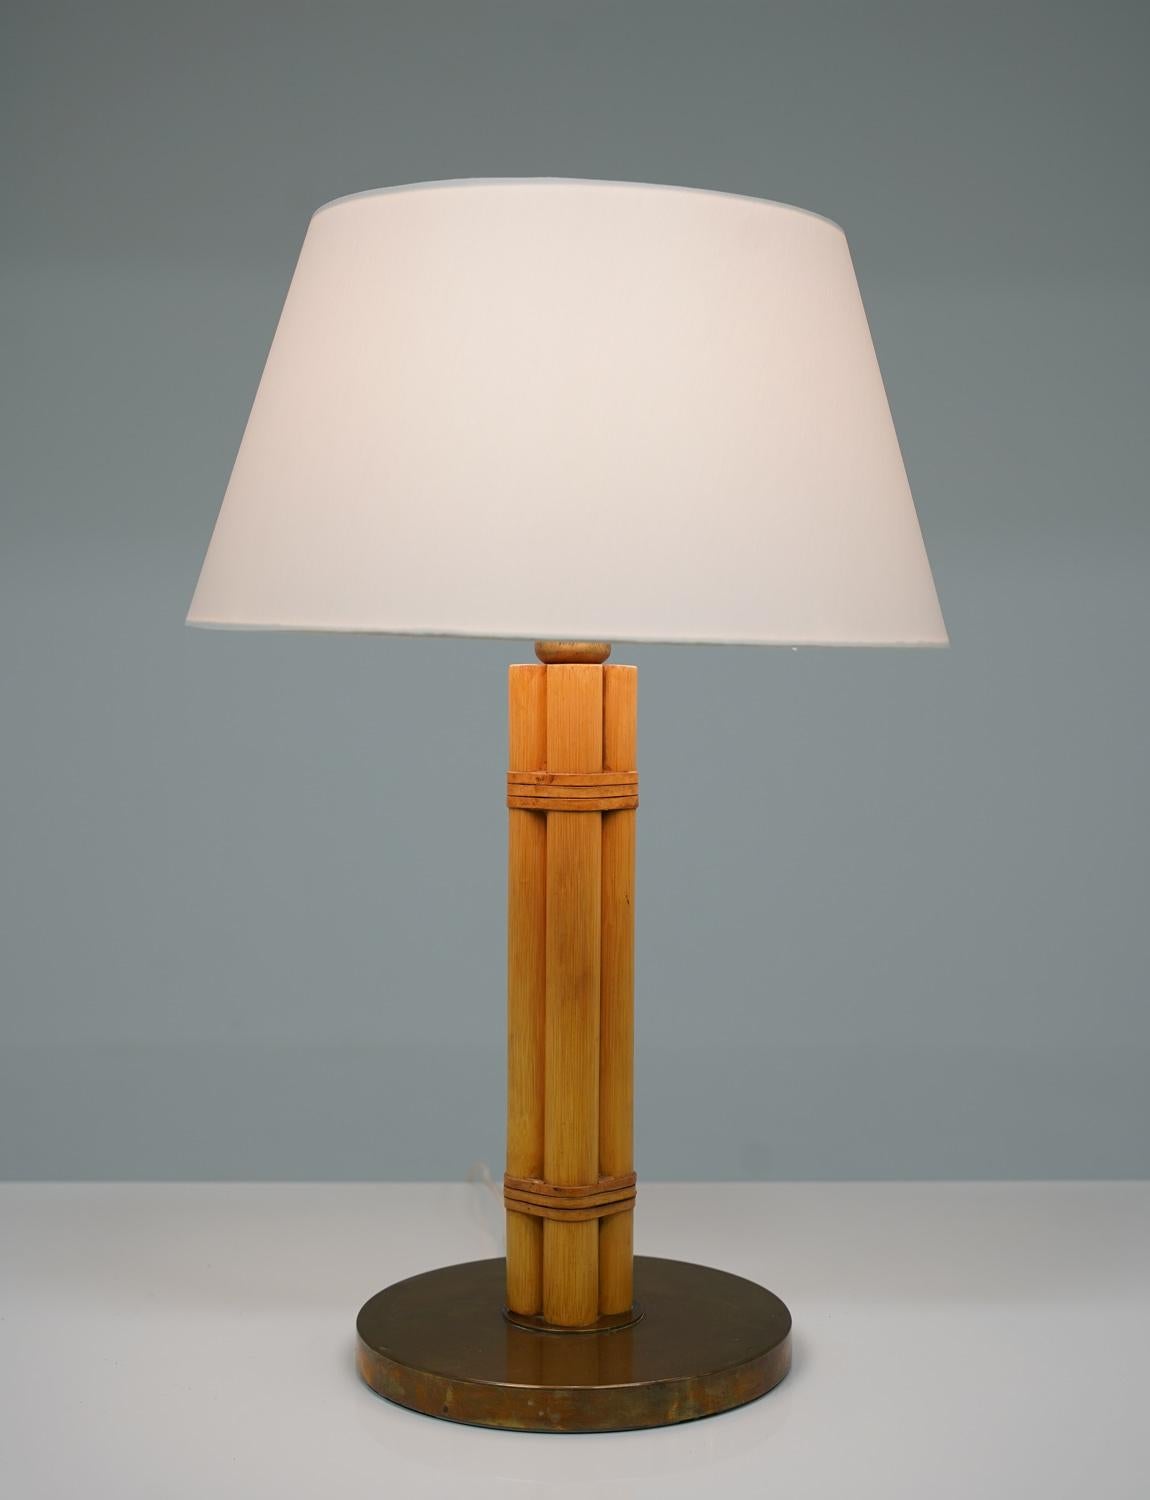 20th Century Scandinavian Midcentury Table Lamp in Brass and Bamboo by Bergboms, Sweden For Sale